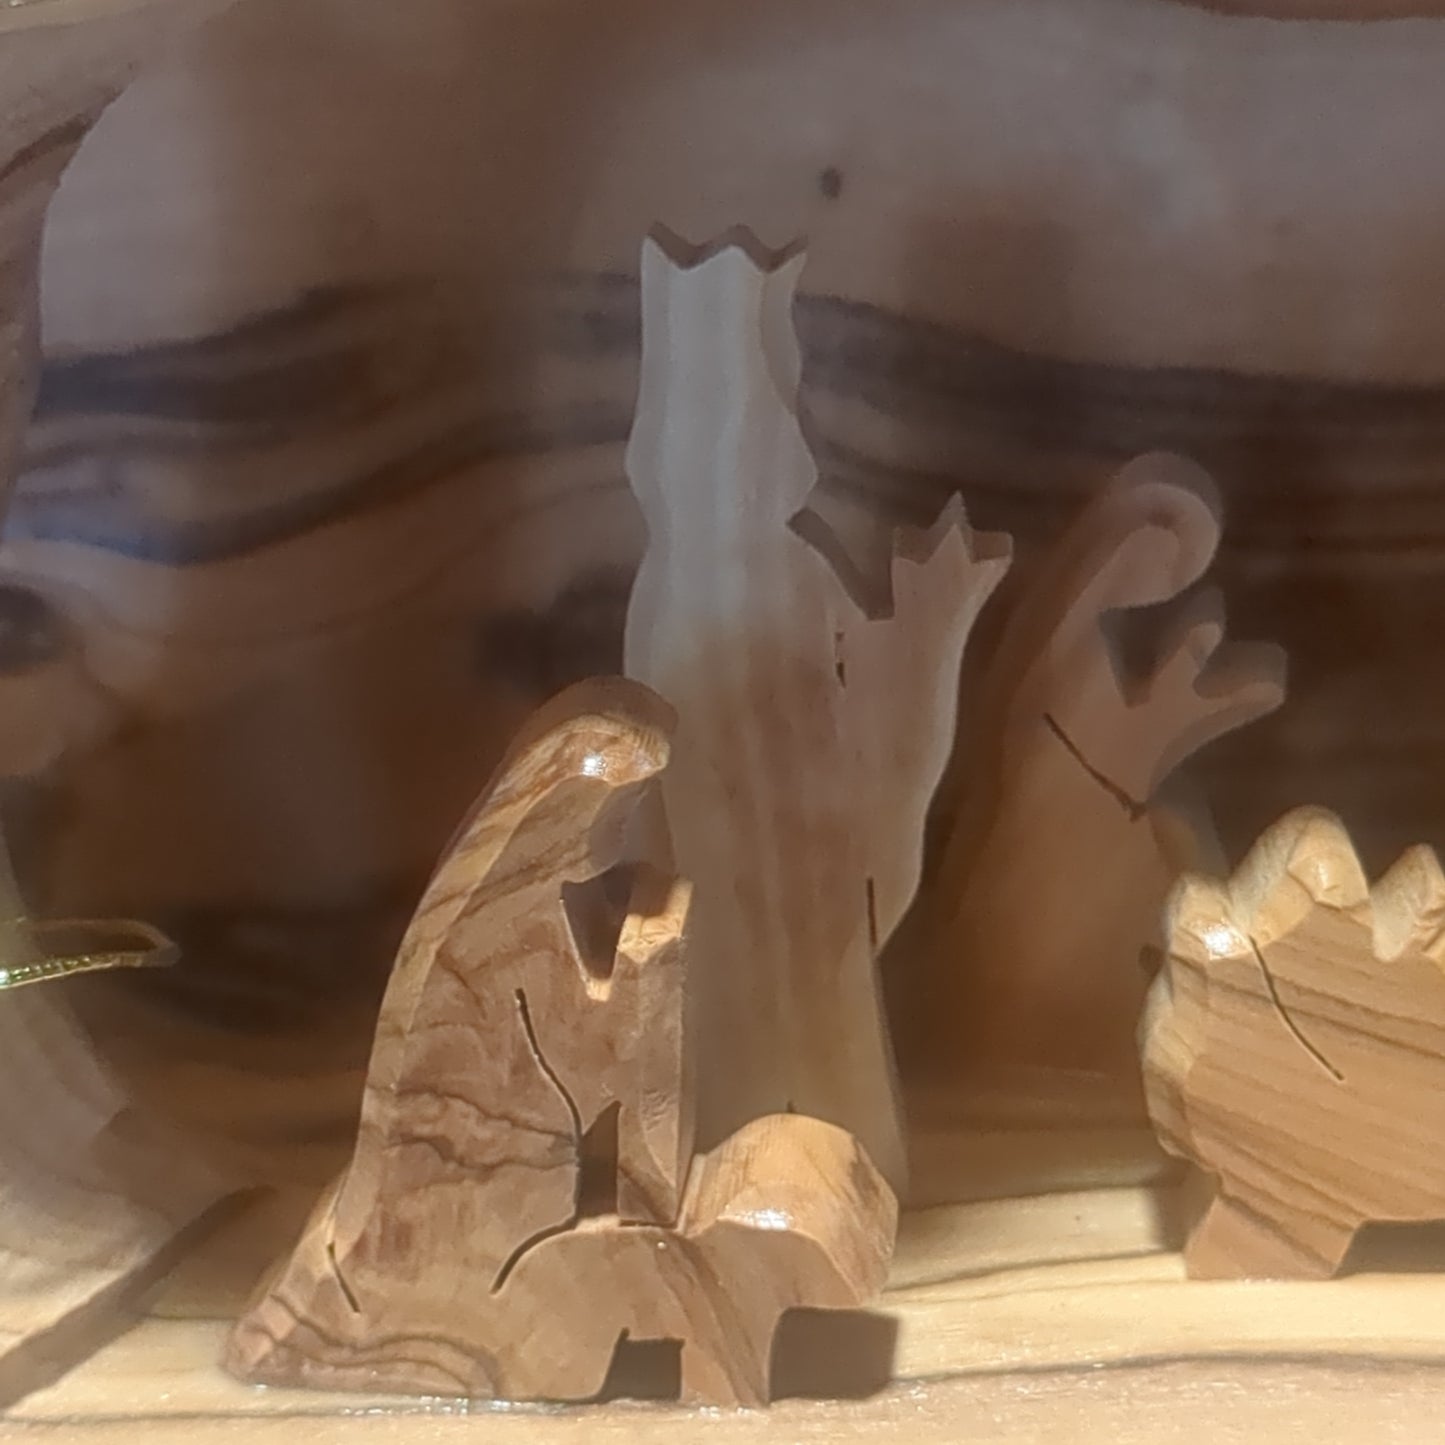 Nativity medium Grotto #2 Carved in olive wood Branch - 4"x8"  made in Bethlehem